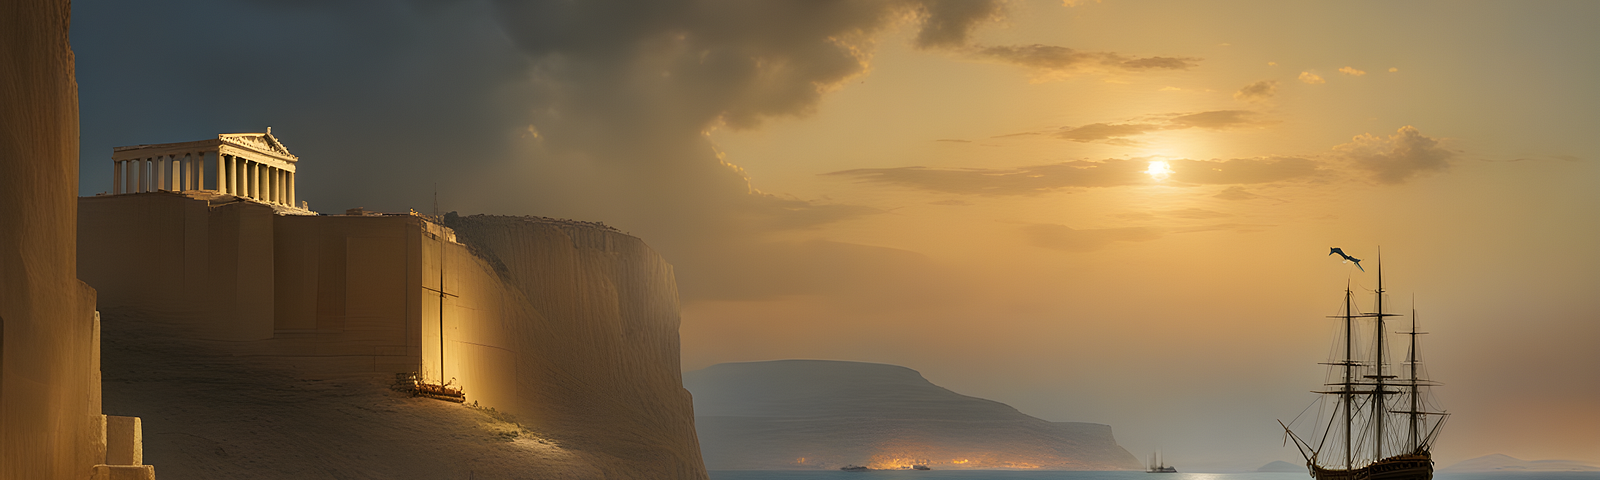 An ancient Greek sunset scene with a ship, sea, cliffs, and a temple high up